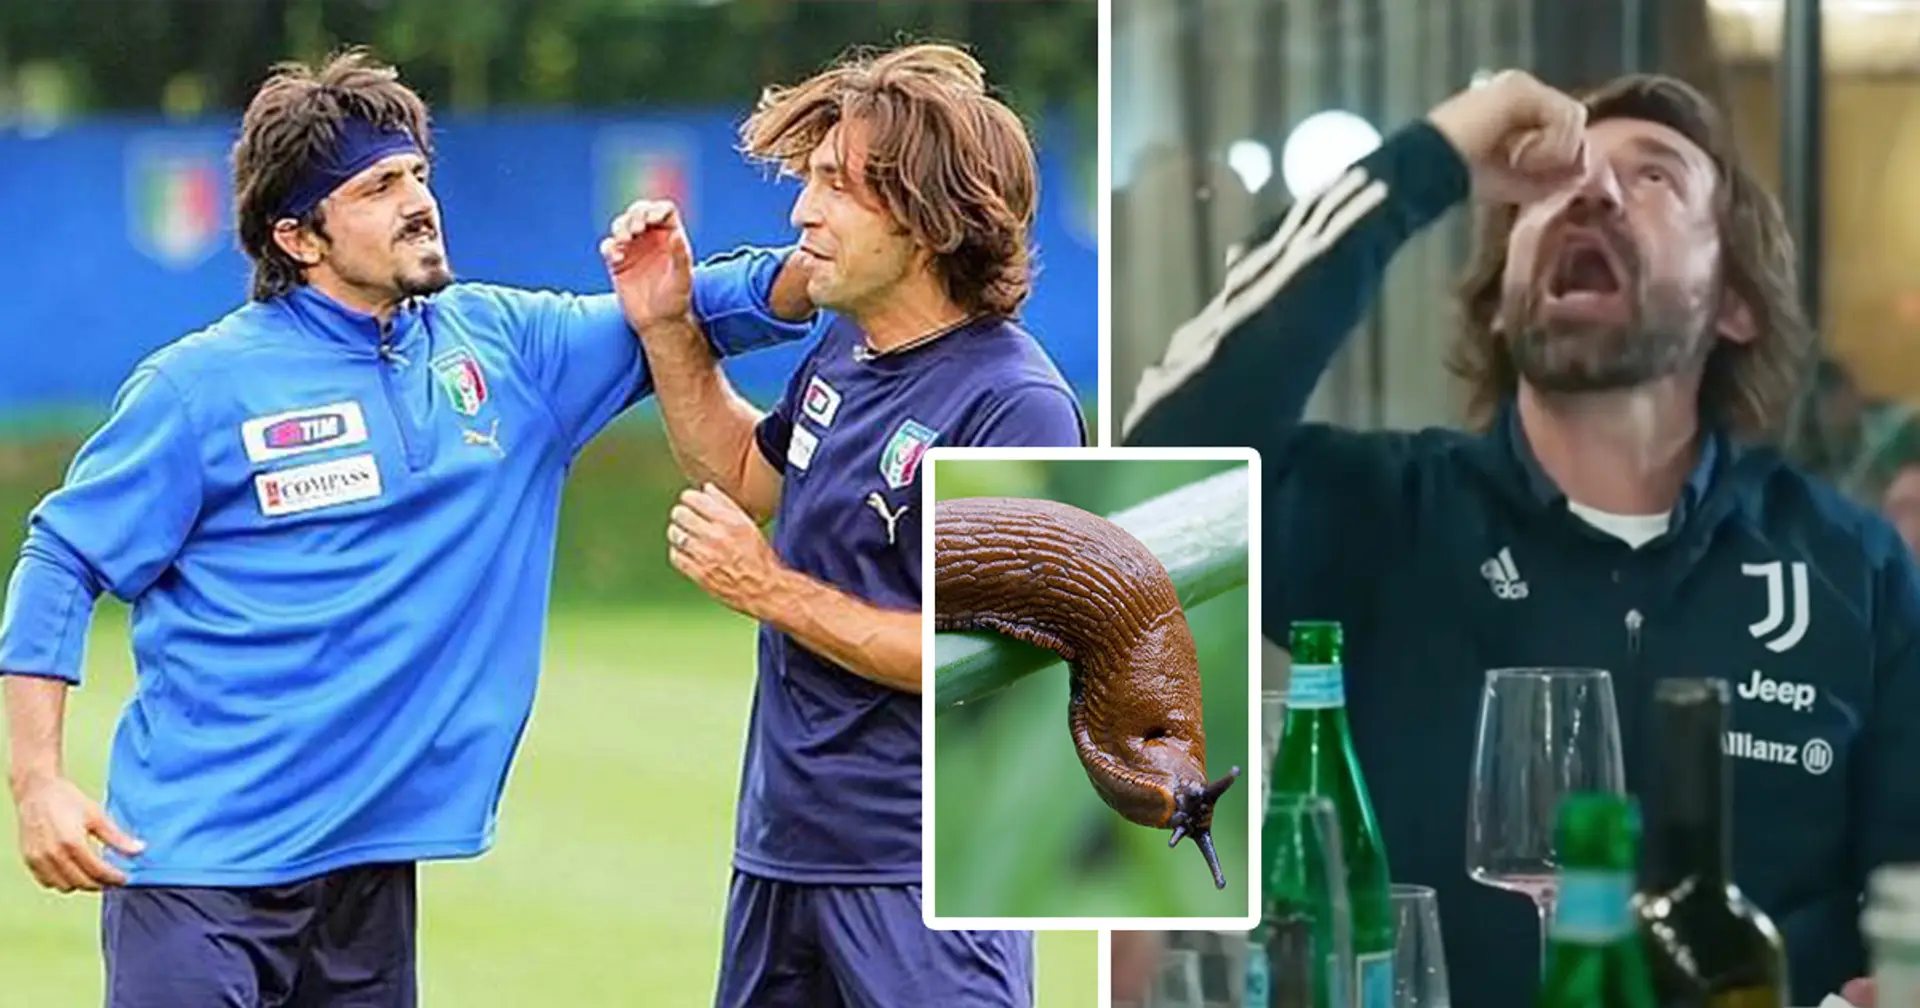 'We didn't pay him anyway': Pirlo reveals how Gattuso once ate a slug for a €10,000 bet